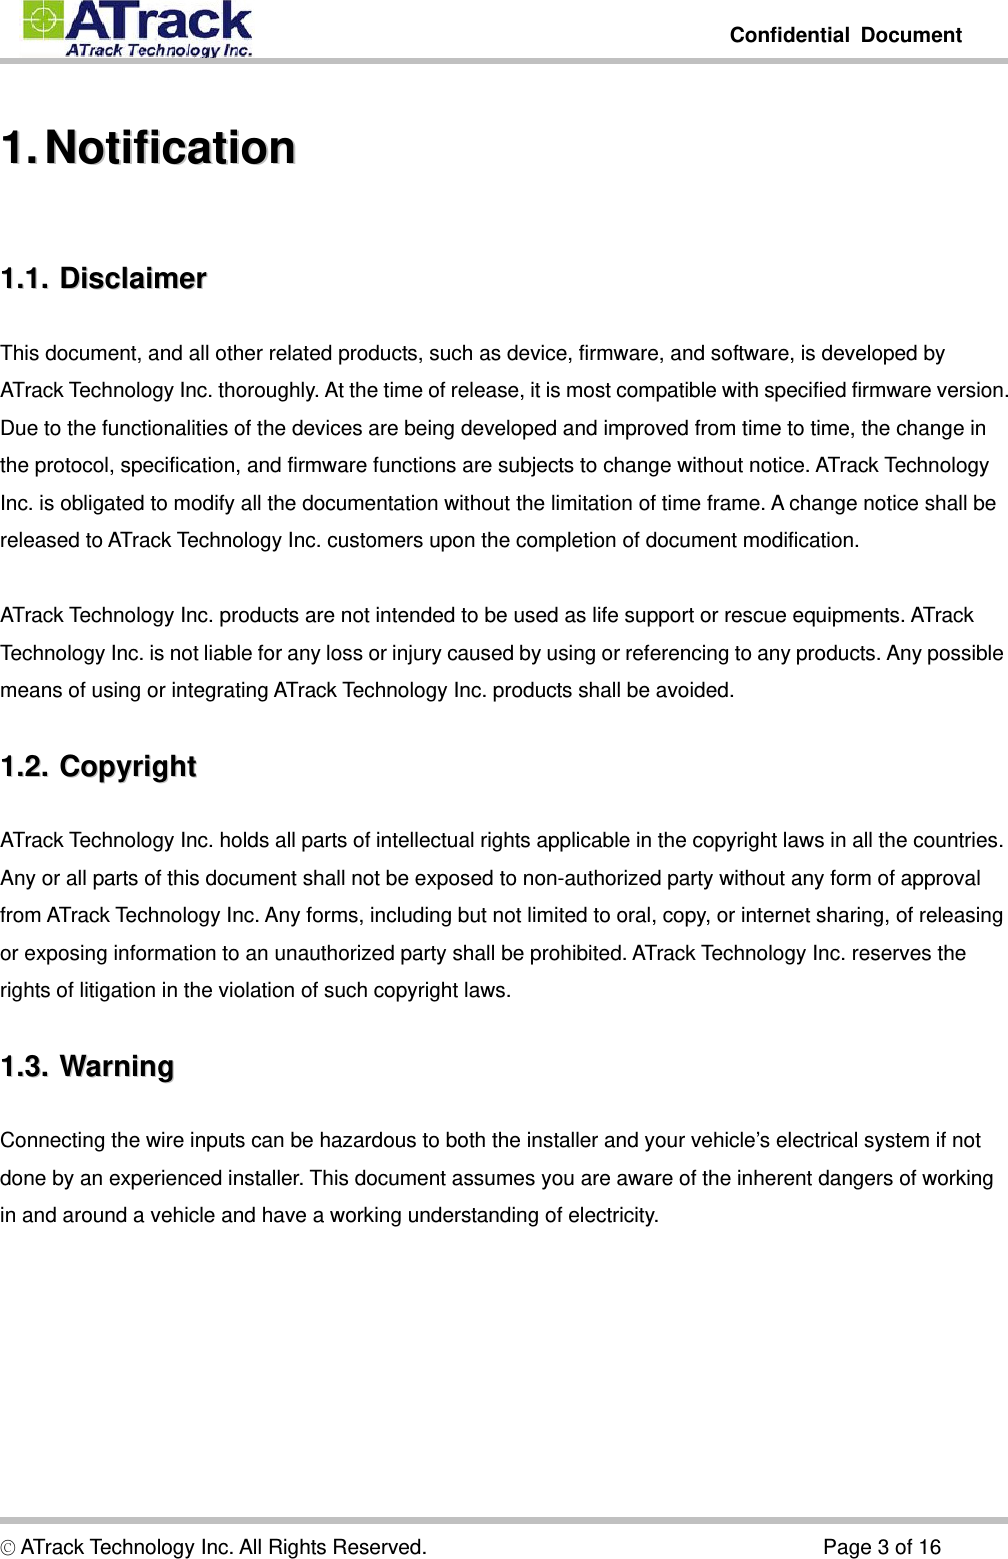         Confidential Document  © ATrack Technology Inc. All Rights Reserved.                                      Page 3 of 16 11..  NNoottiiffiiccaattiioonn  11..11..  DDiissccllaaiimmeerr  This document, and all other related products, such as device, firmware, and software, is developed by ATrack Technology Inc. thoroughly. At the time of release, it is most compatible with specified firmware version. Due to the functionalities of the devices are being developed and improved from time to time, the change in the protocol, specification, and firmware functions are subjects to change without notice. ATrack Technology Inc. is obligated to modify all the documentation without the limitation of time frame. A change notice shall be released to ATrack Technology Inc. customers upon the completion of document modification.  ATrack Technology Inc. products are not intended to be used as life support or rescue equipments. ATrack Technology Inc. is not liable for any loss or injury caused by using or referencing to any products. Any possible means of using or integrating ATrack Technology Inc. products shall be avoided. 11..22..  CCooppyyrriigghhtt  ATrack Technology Inc. holds all parts of intellectual rights applicable in the copyright laws in all the countries. Any or all parts of this document shall not be exposed to non-authorized party without any form of approval from ATrack Technology Inc. Any forms, including but not limited to oral, copy, or internet sharing, of releasing or exposing information to an unauthorized party shall be prohibited. ATrack Technology Inc. reserves the rights of litigation in the violation of such copyright laws. 11..33..  WWaarrnniinngg  Connecting the wire inputs can be hazardous to both the installer and your vehicle’s electrical system if not done by an experienced installer. This document assumes you are aware of the inherent dangers of working in and around a vehicle and have a working understanding of electricity. 